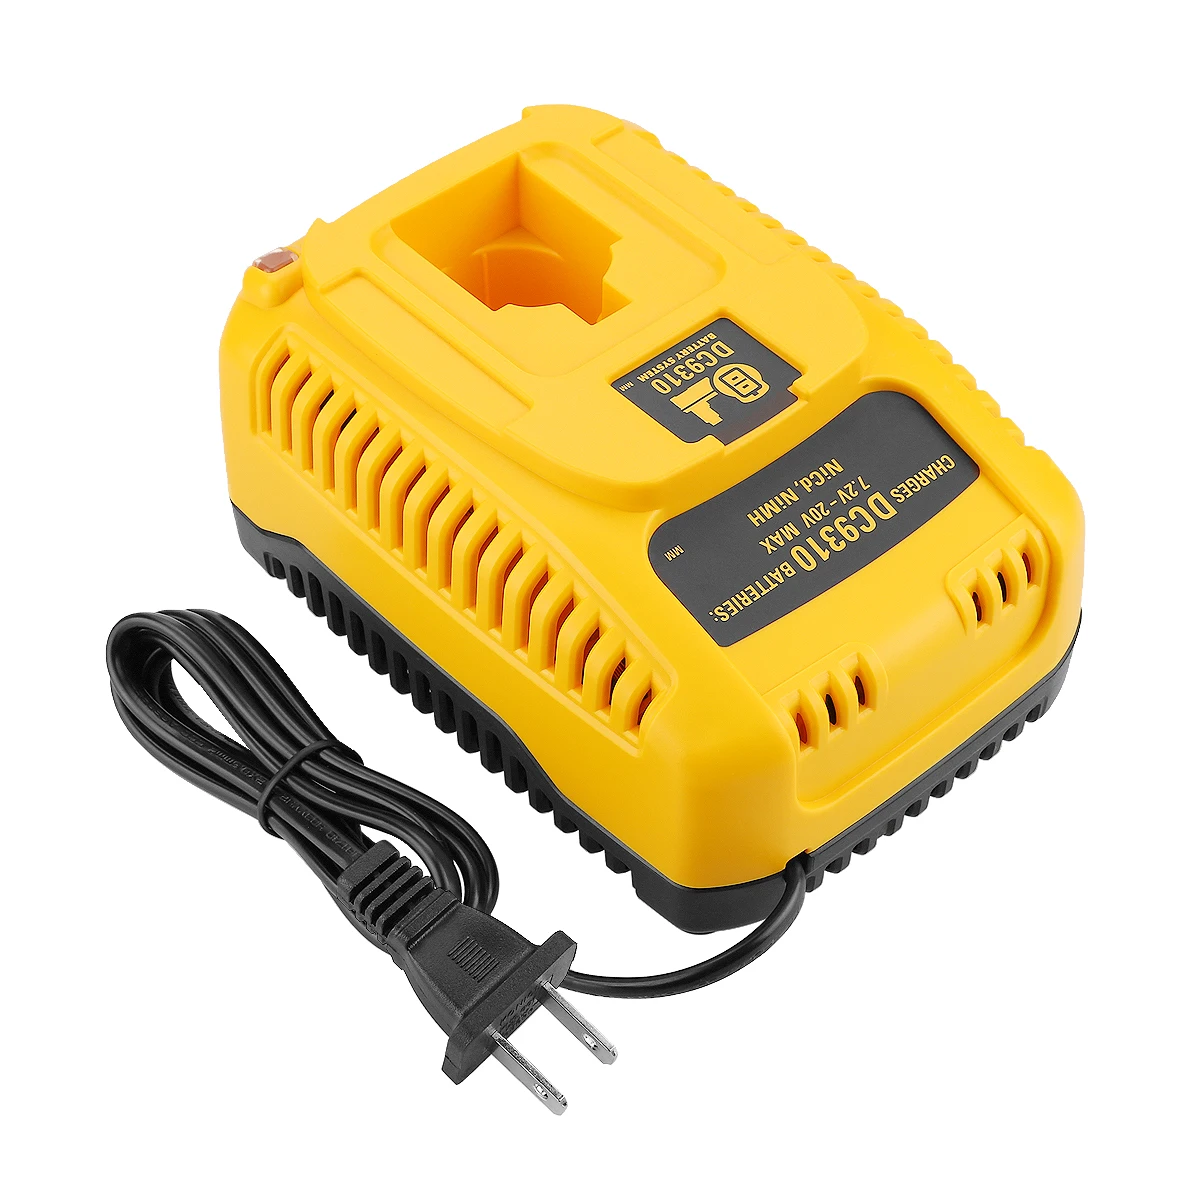 

7.2V-18V replacement for dewalt Ni-Cd Ni-MH battery power tool charger factory wholesale, As picture